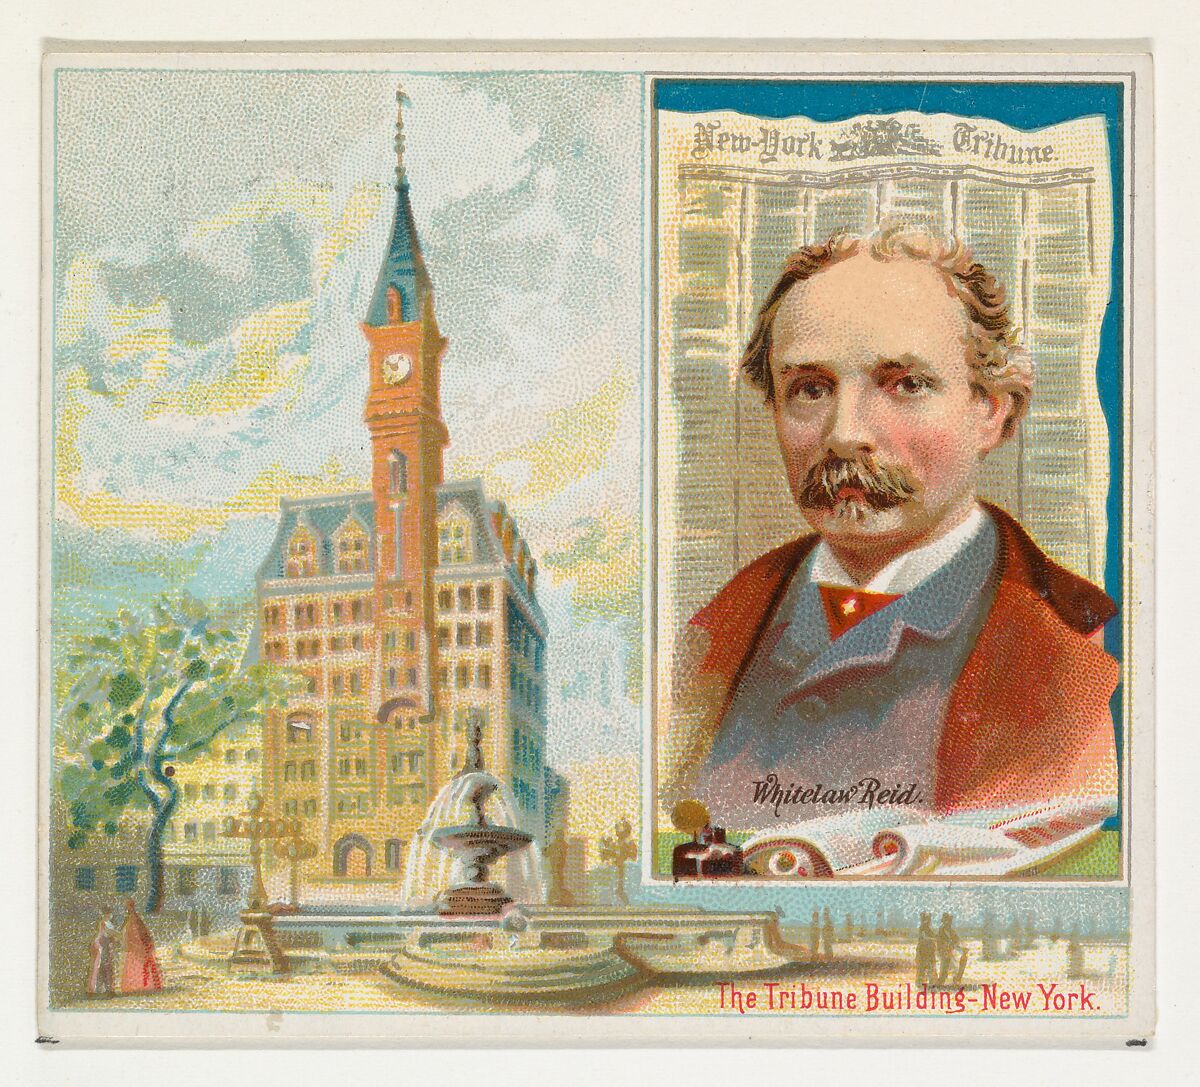 Whitelaw Reid, New York Tribune, from the American Editors series (N35) for Allen & Ginter Cigarettes, Issued by Allen &amp; Ginter (American, Richmond, Virginia), Commercial color lithograph 